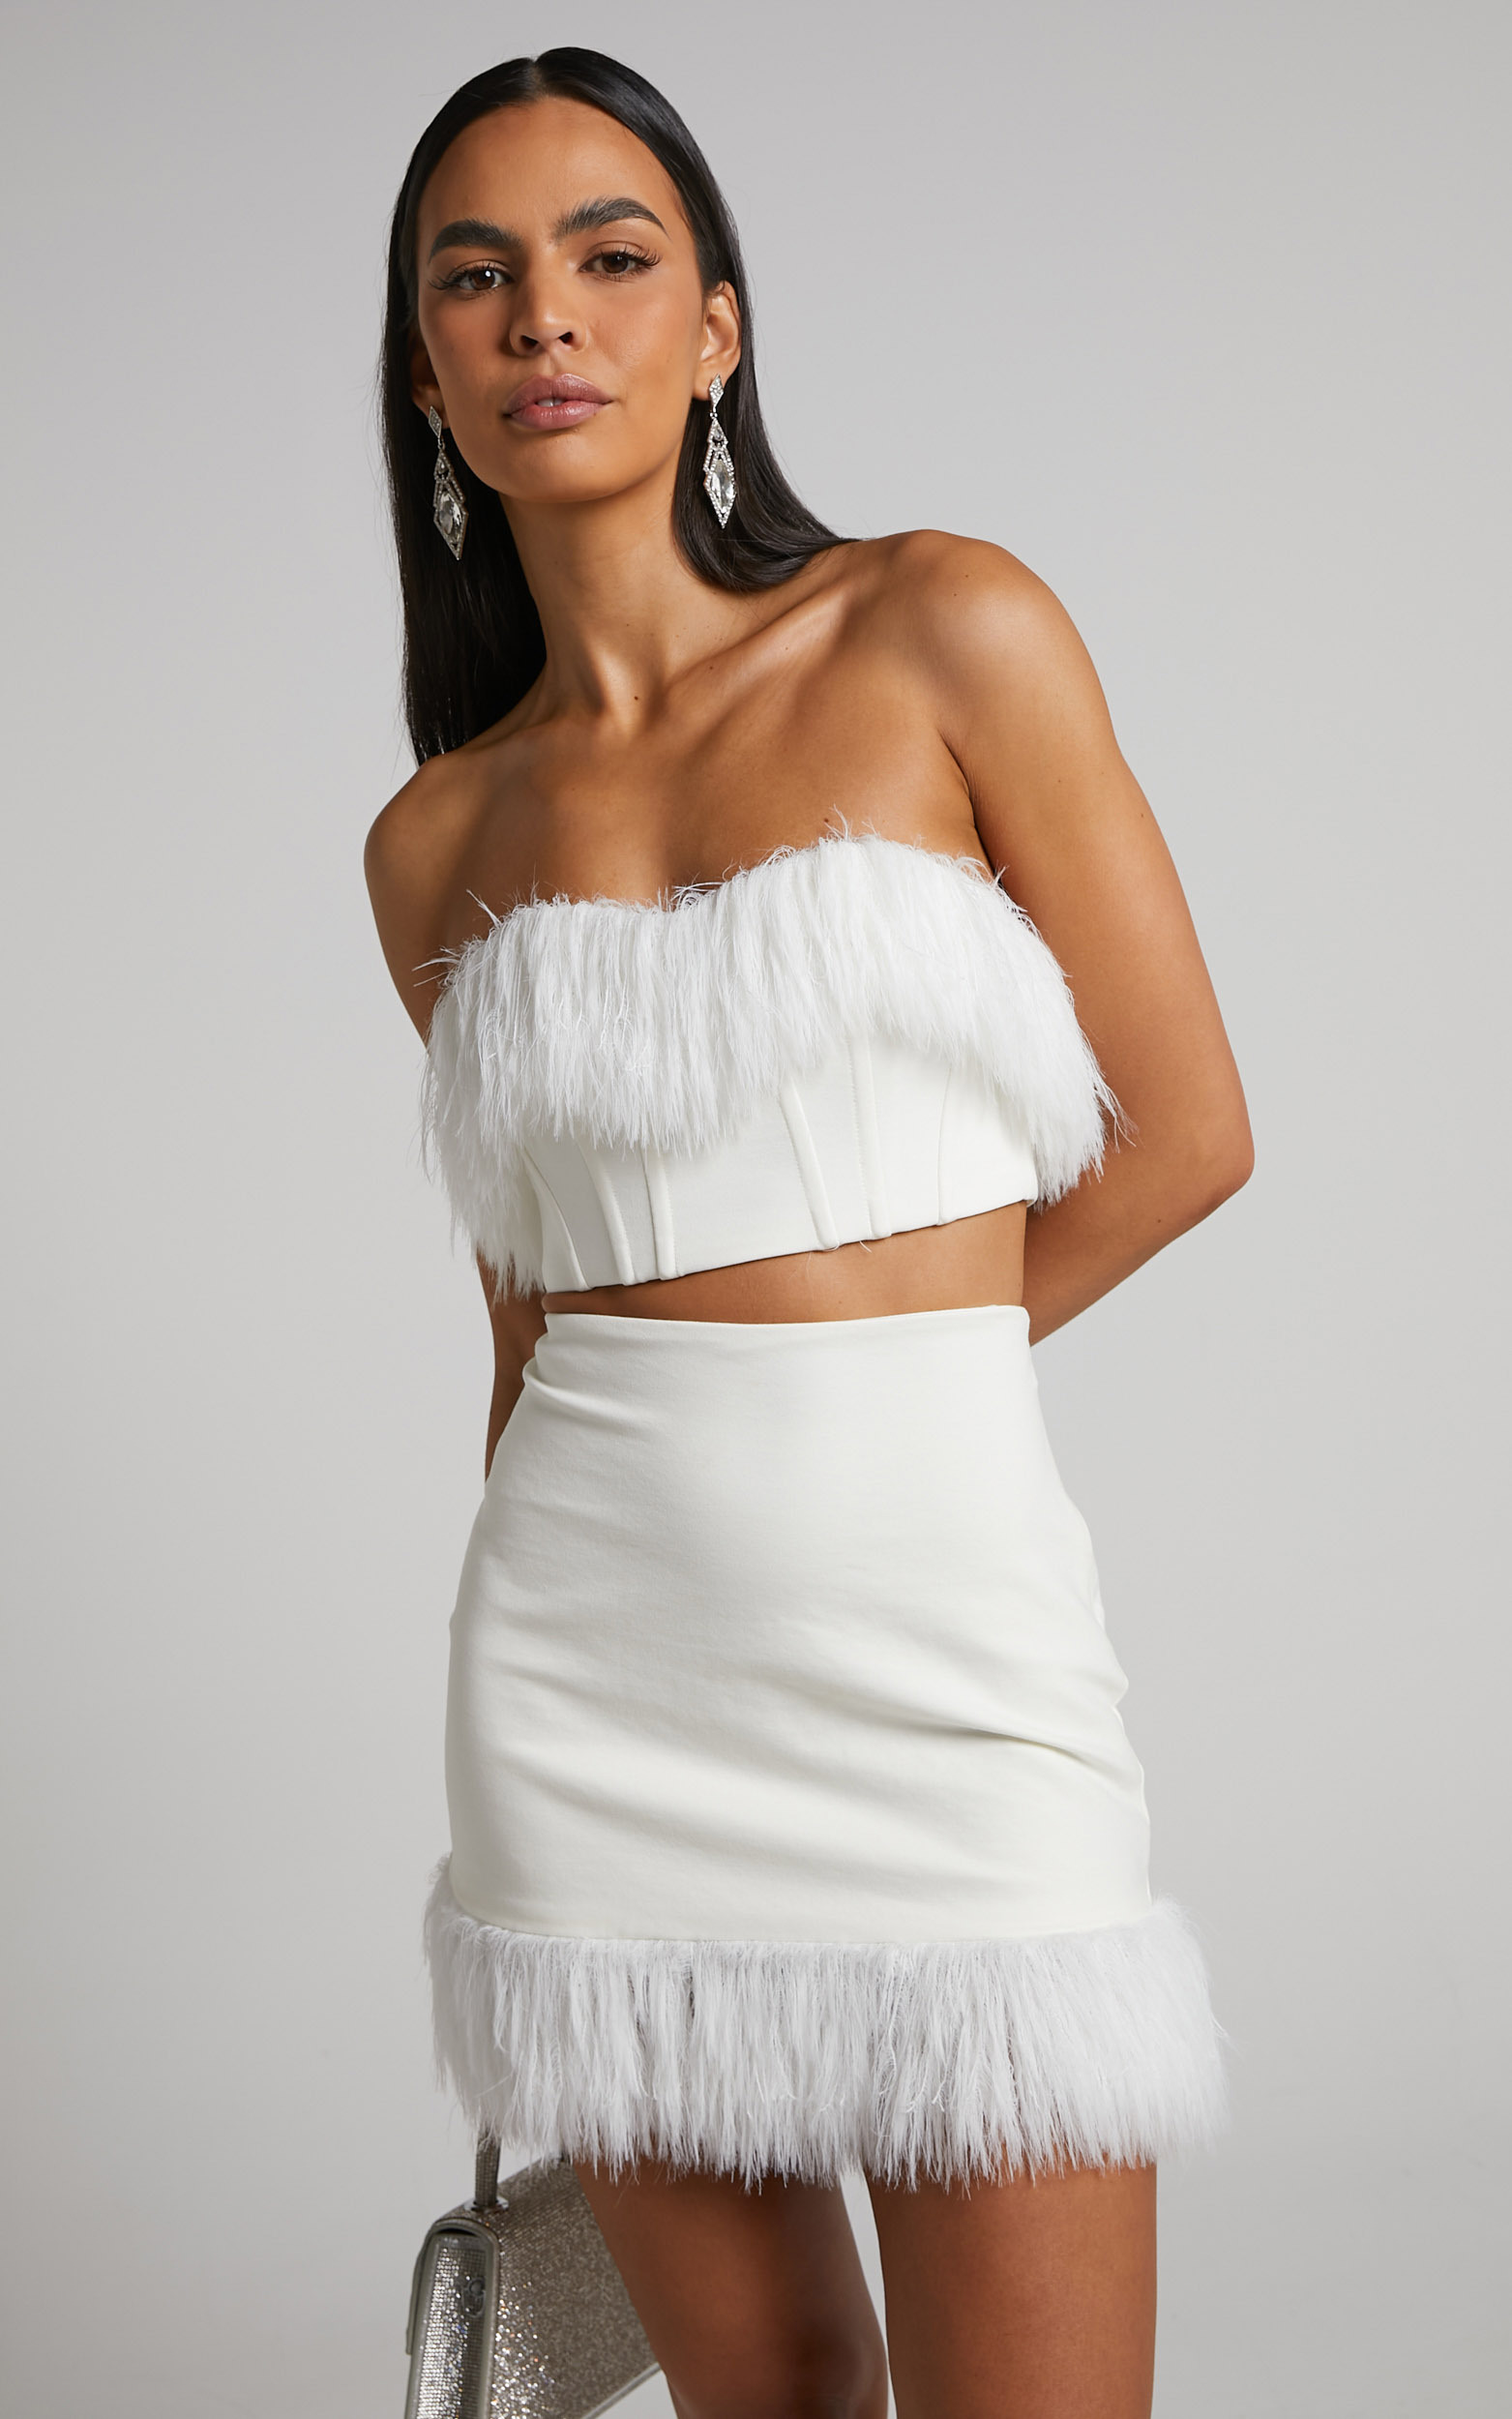 Rhaiza Mini Skirt - Faux Feather Trim High Waisted Skirt in White - 06, WHT1, hi-res image number null